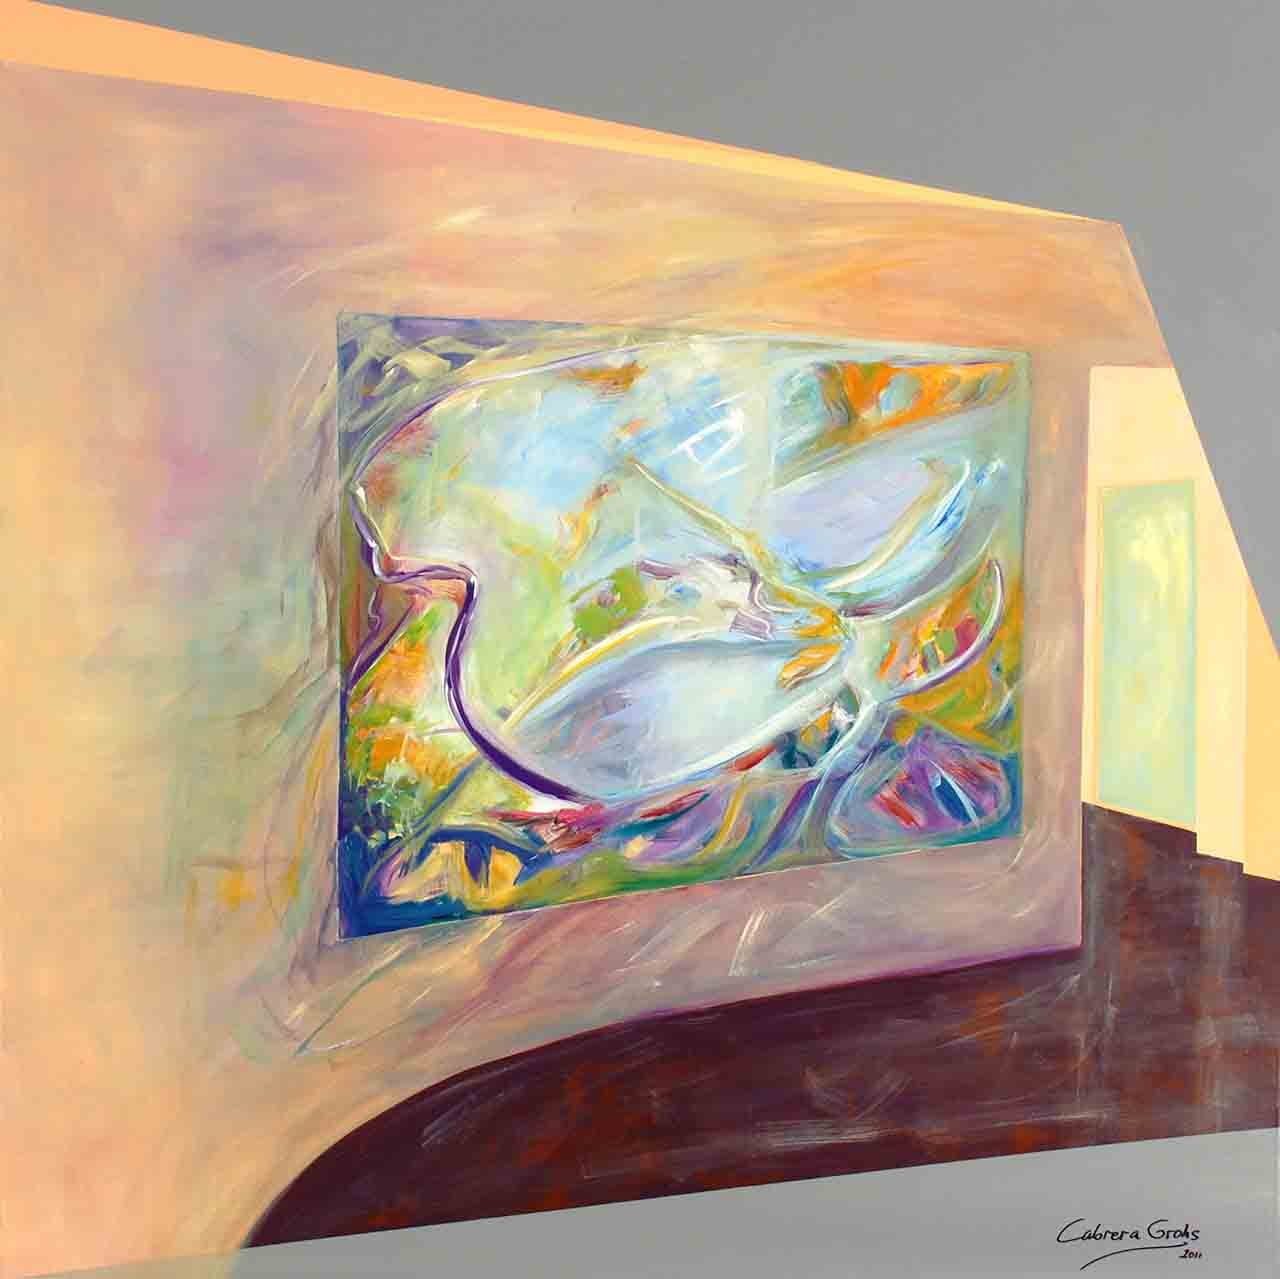 Painting of an interior wall that has another colorful abstract painting hanging